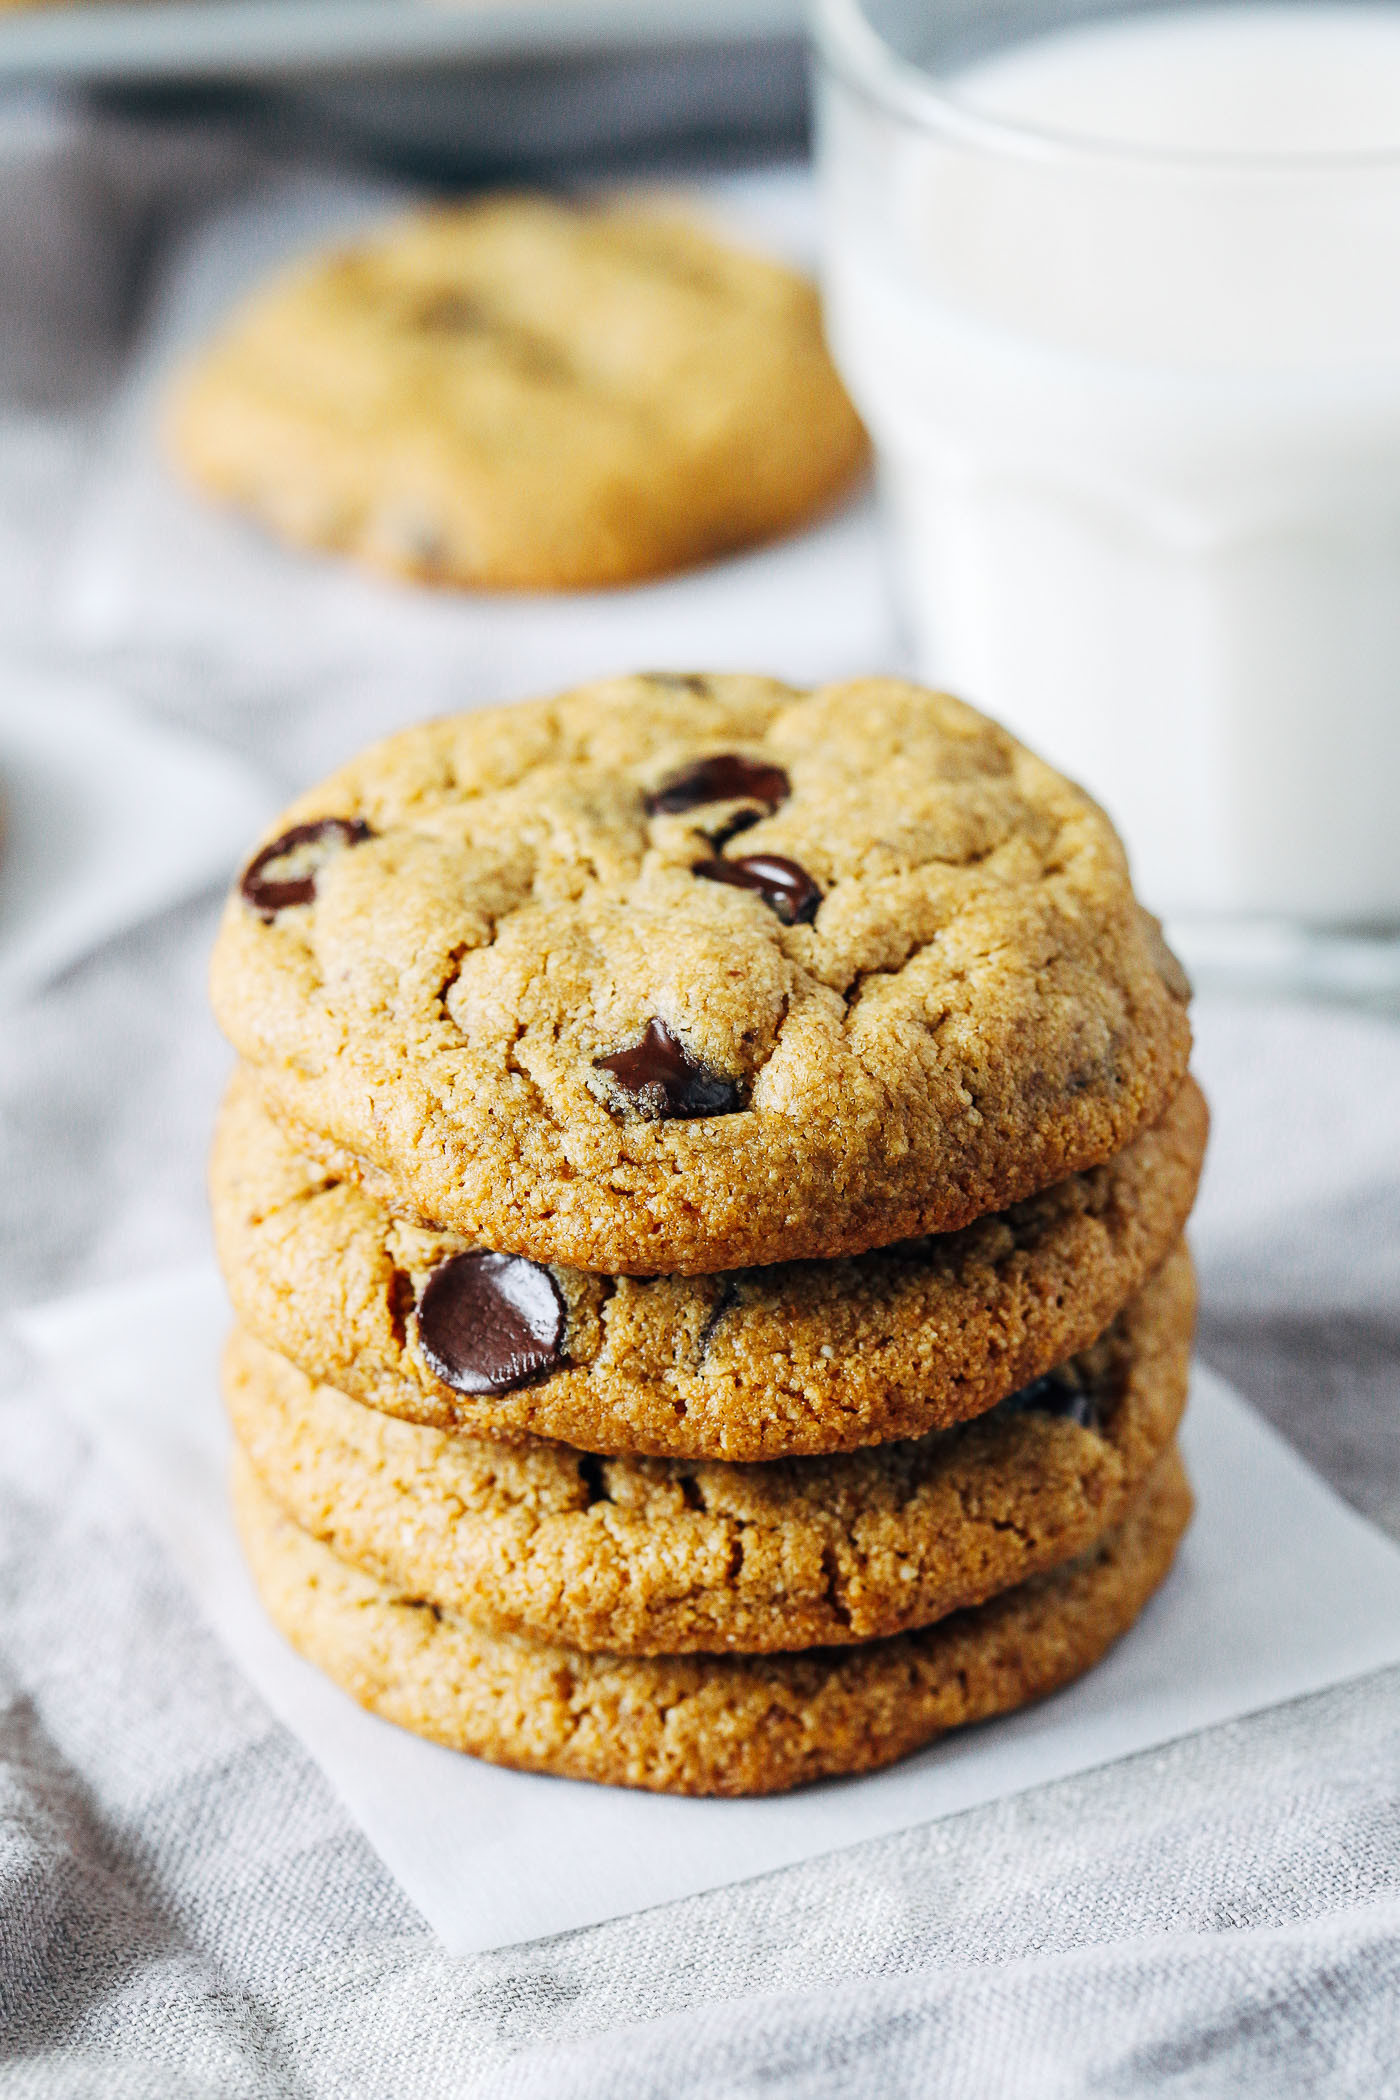 Gluten Free Candy Recipes
 The Best Vegan and Gluten free Chocolate Chip Cookies